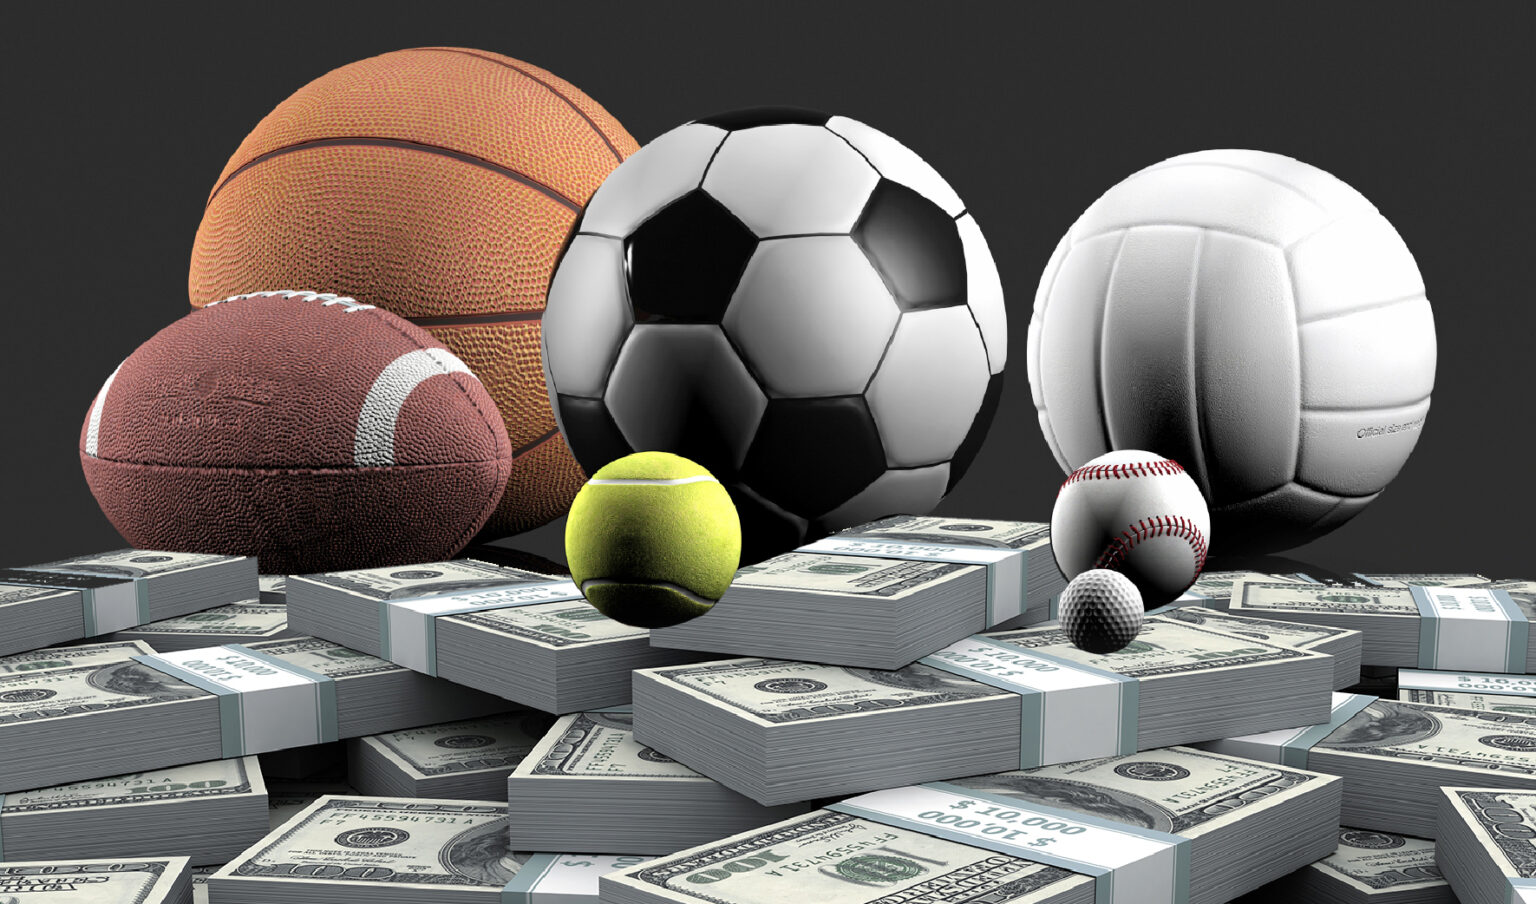 What Are the Different Types of Sports Betting That Exist Today?